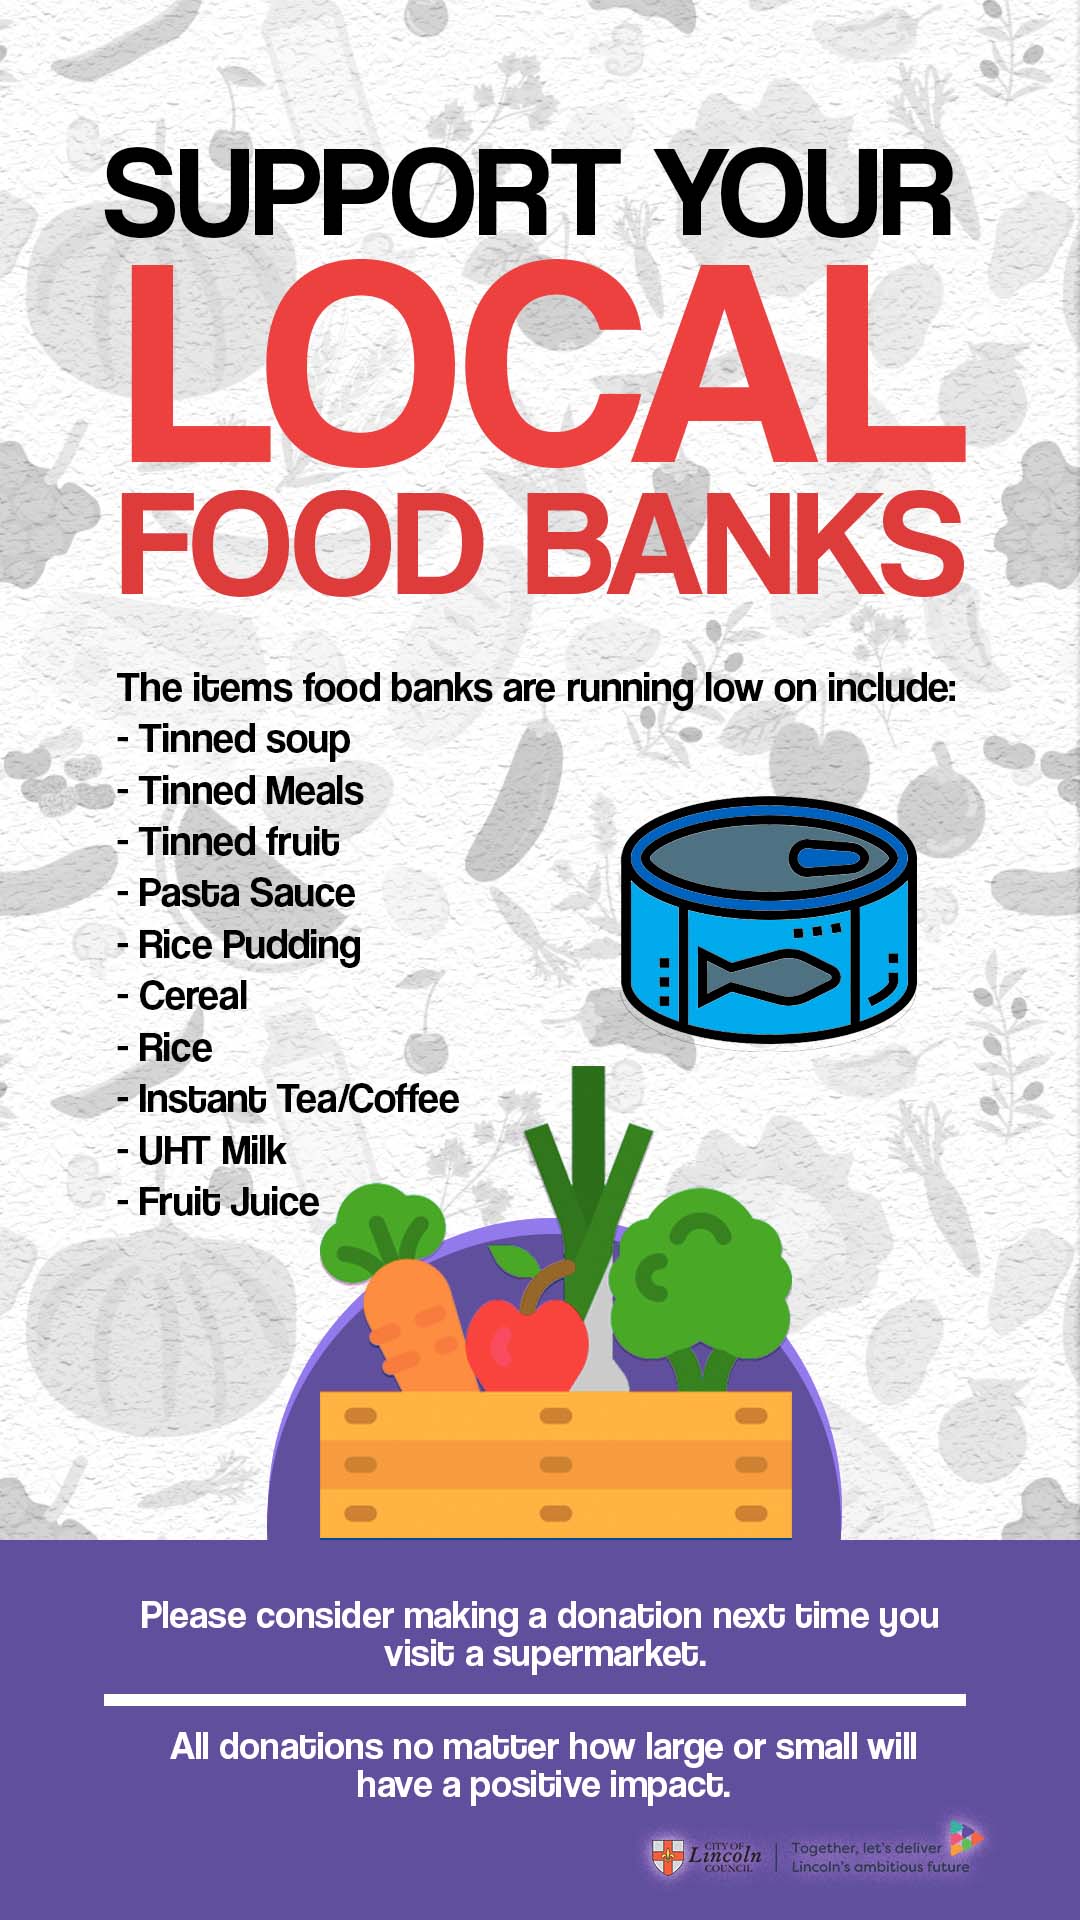 Support your local foodbank